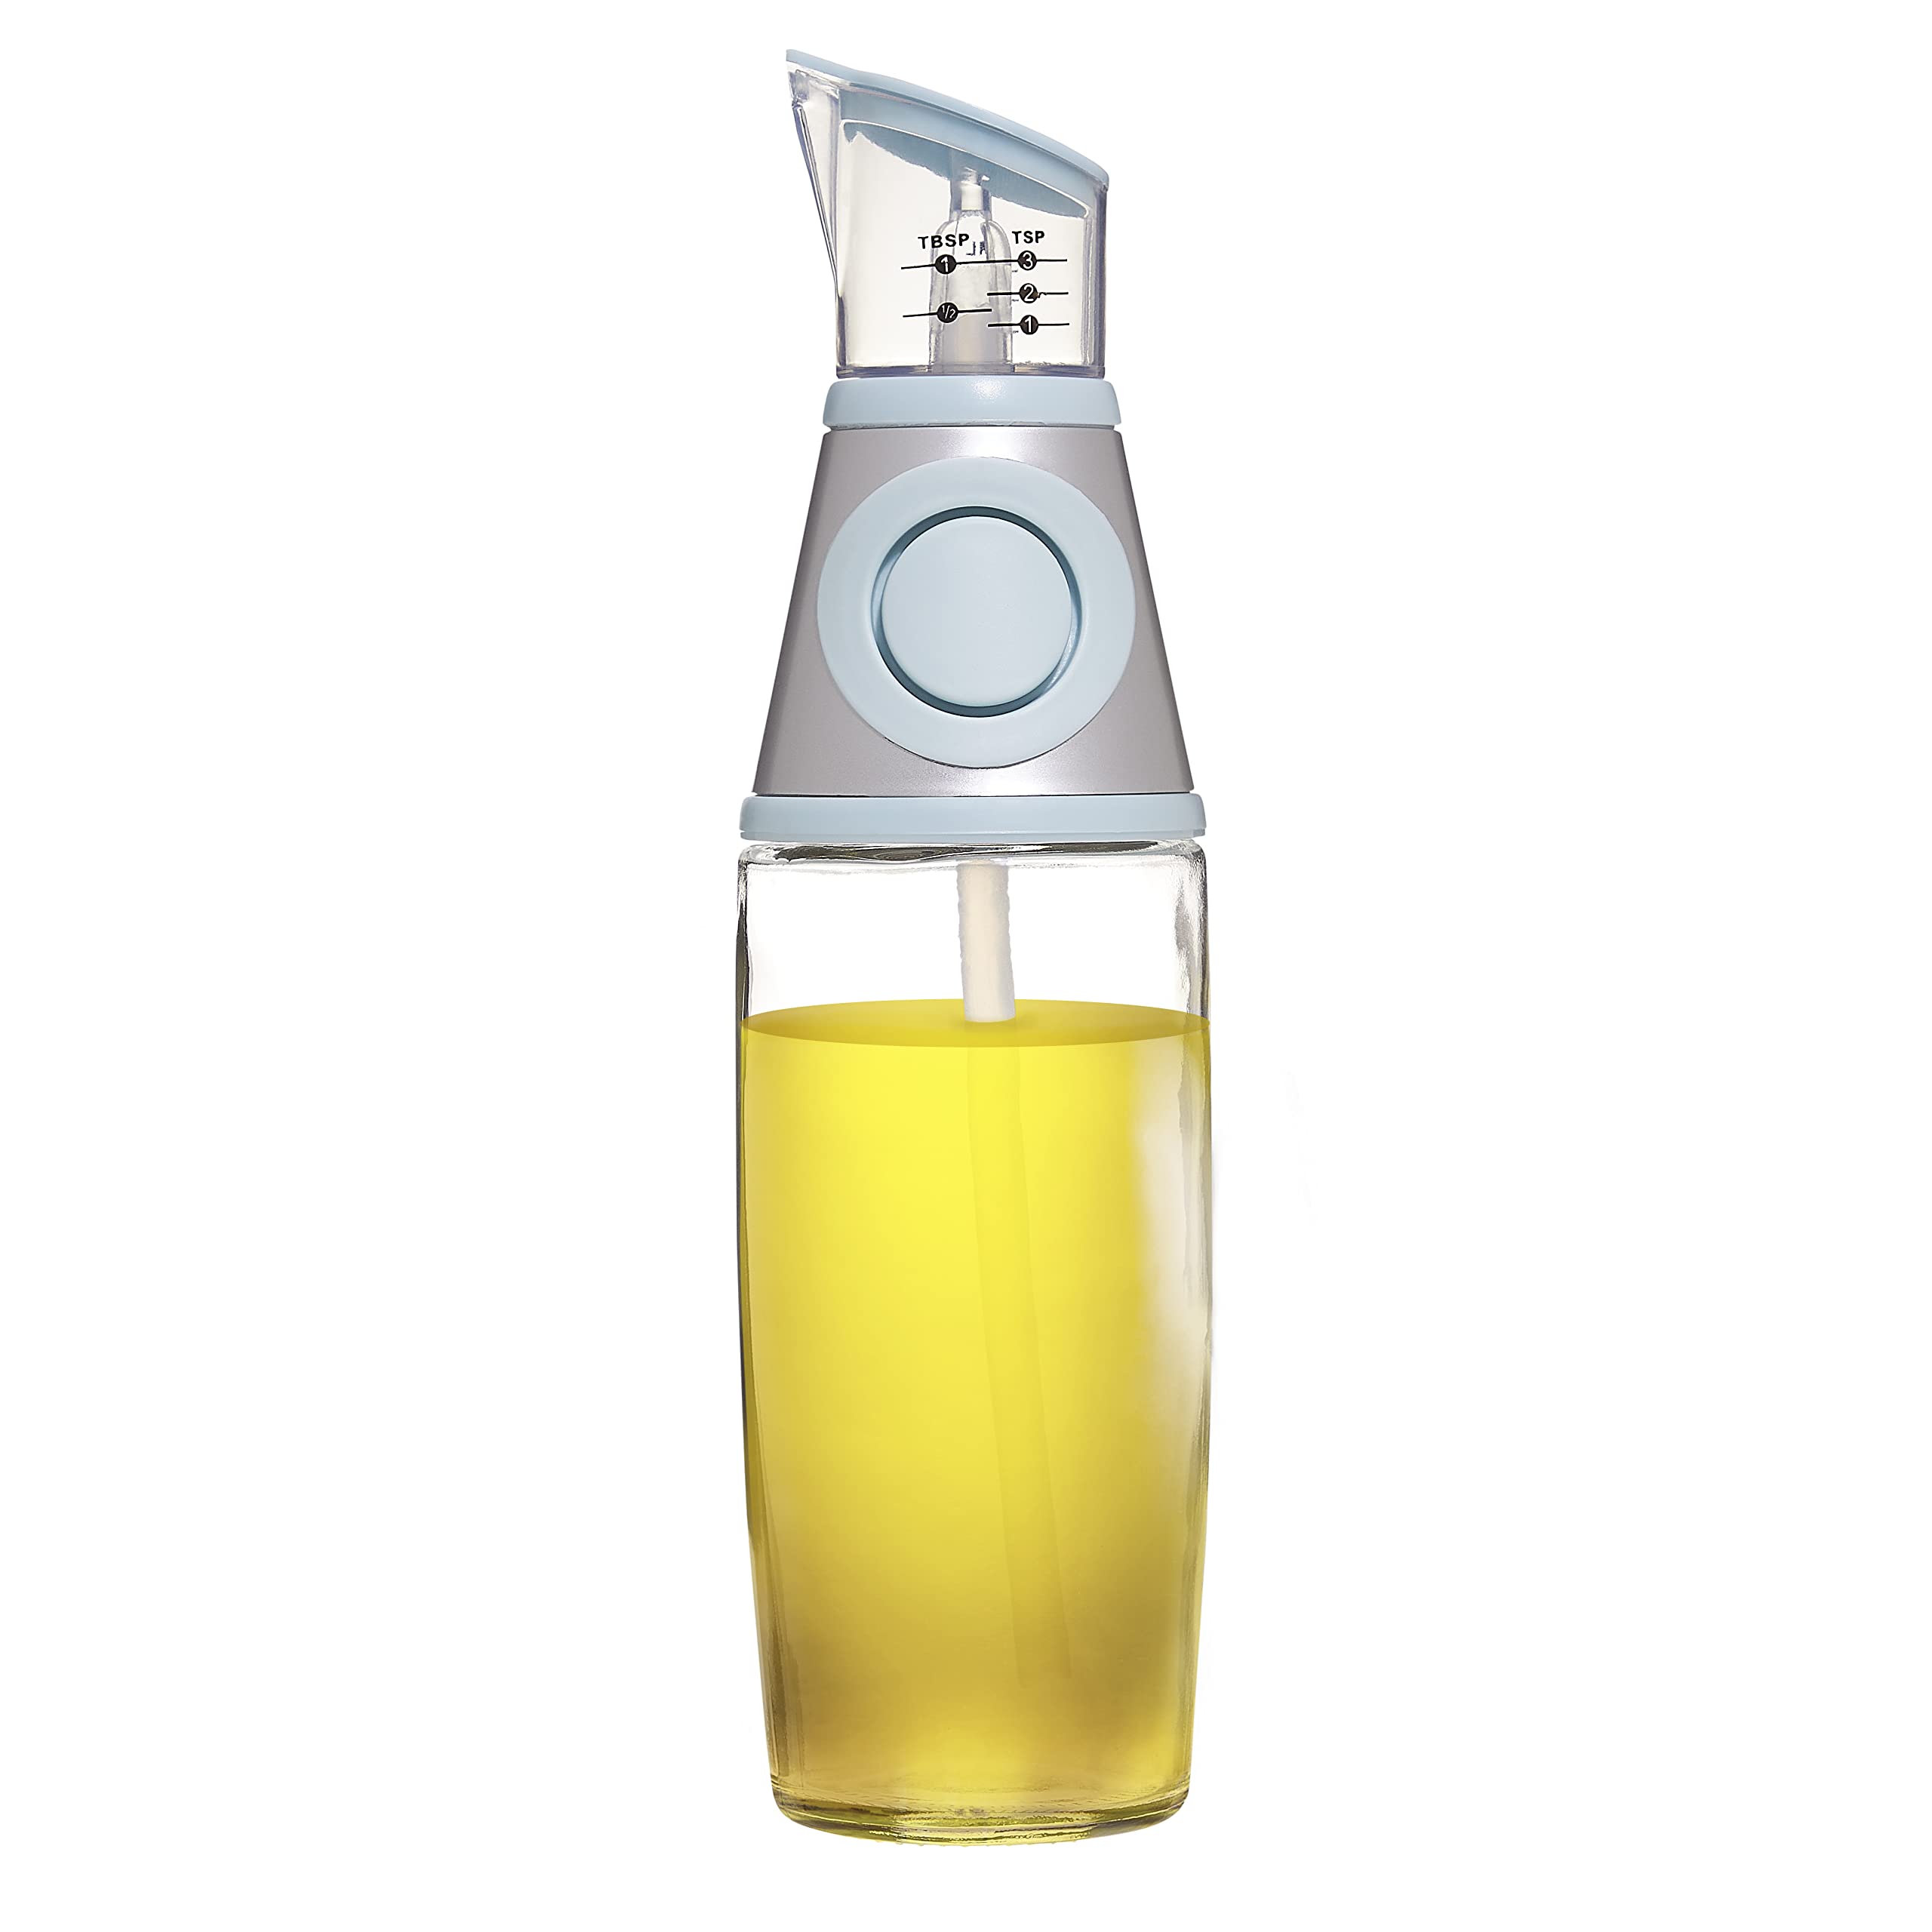 COOK WITH COLOR Oil Dispenser with Portion Control - Effortlessly Measure and Pour Oil with Precision for Healthy Cooking - Non-Drip Spout, Easy to Clean - Ideal for Olive, Vegetable, and Cooking Oils  - Like New